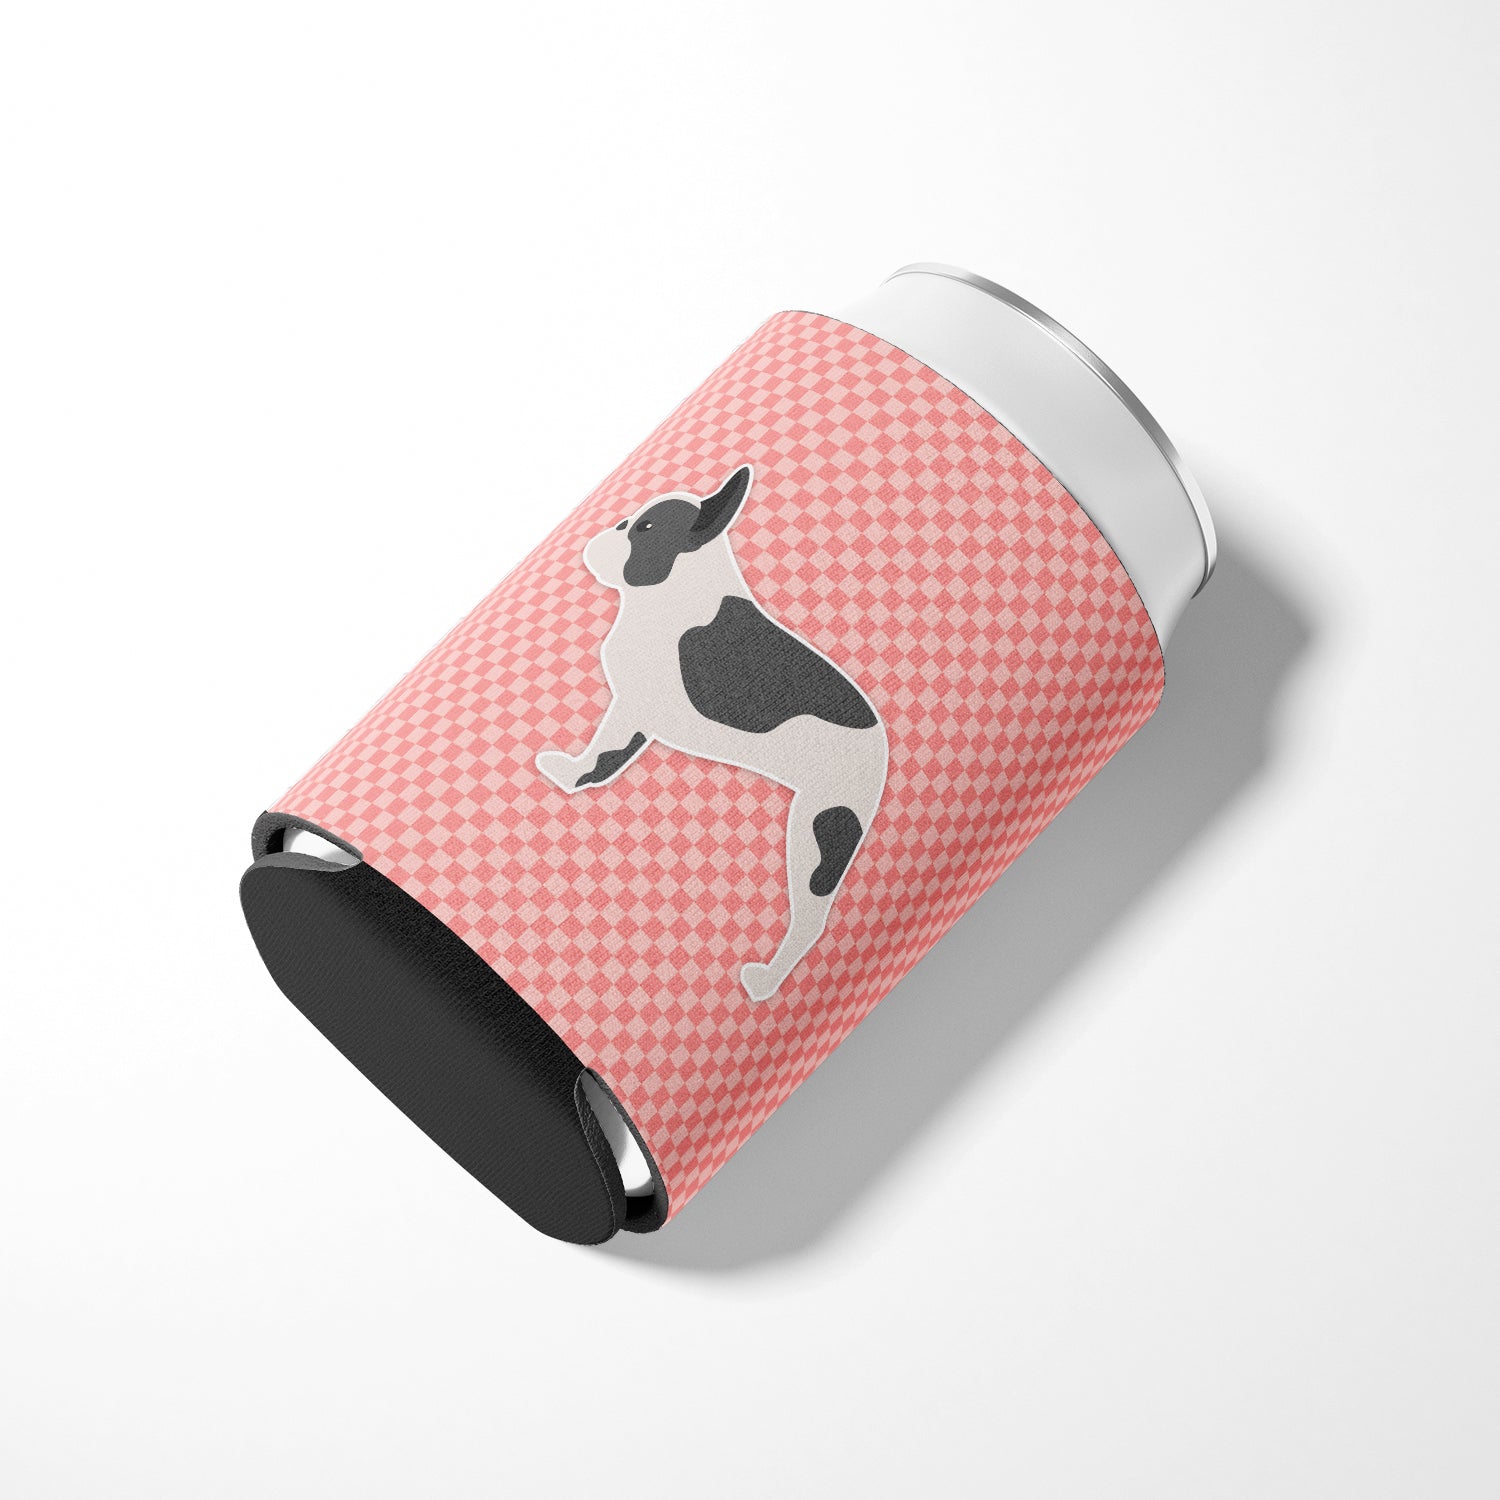 French Bulldog Checkerboard Pink Can or Bottle Hugger BB3641CC